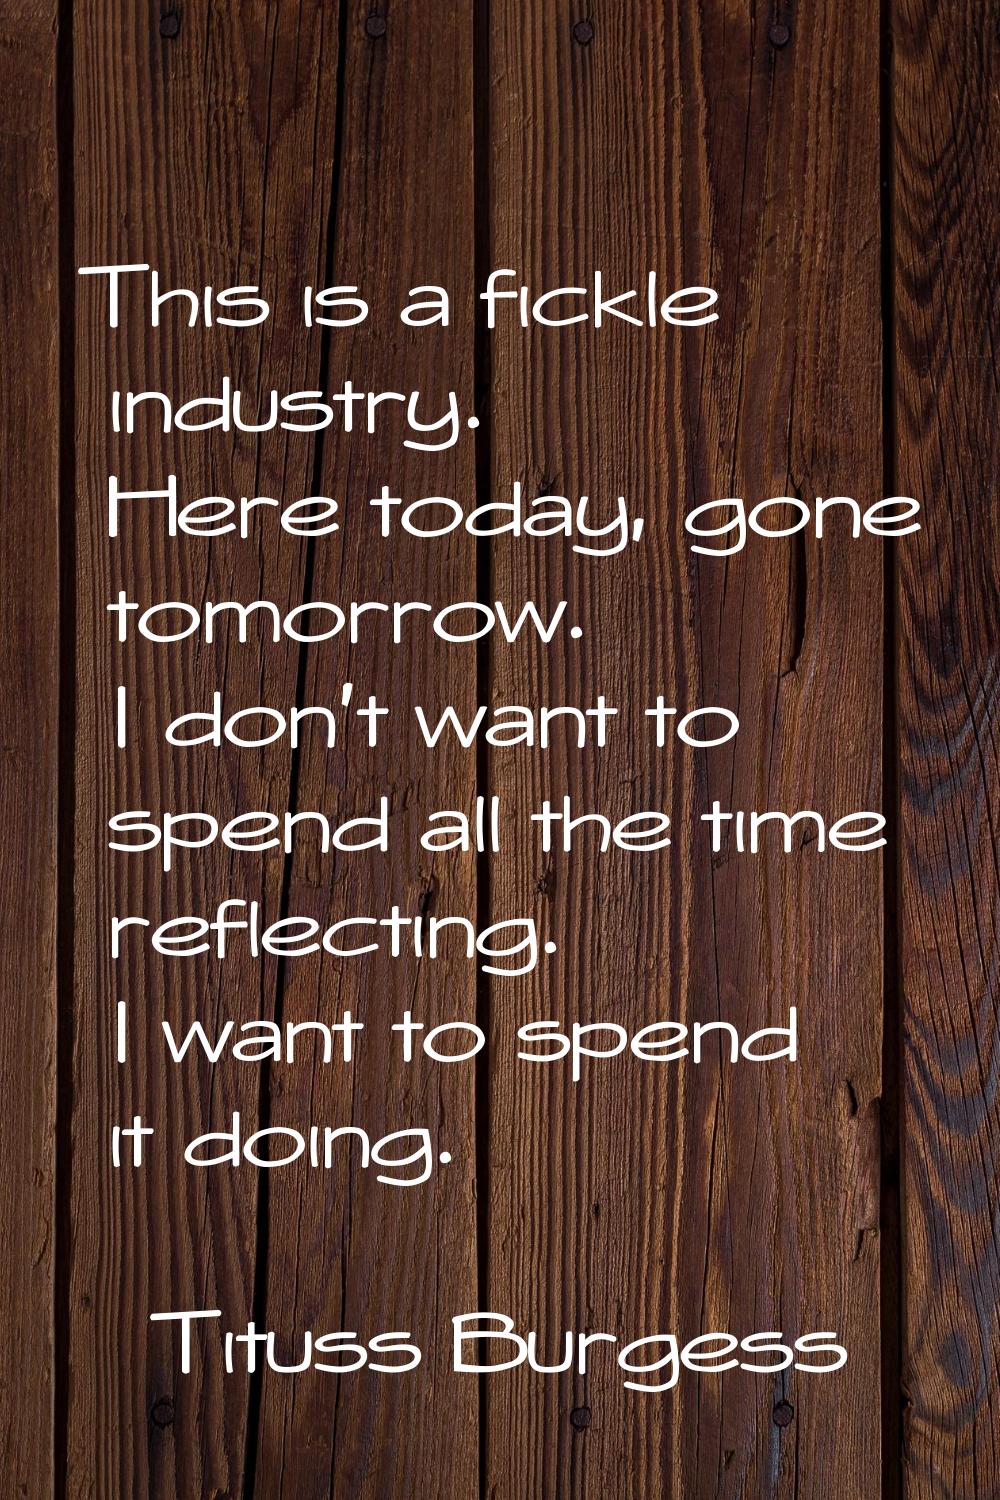 This is a fickle industry. Here today, gone tomorrow. I don't want to spend all the time reflecting